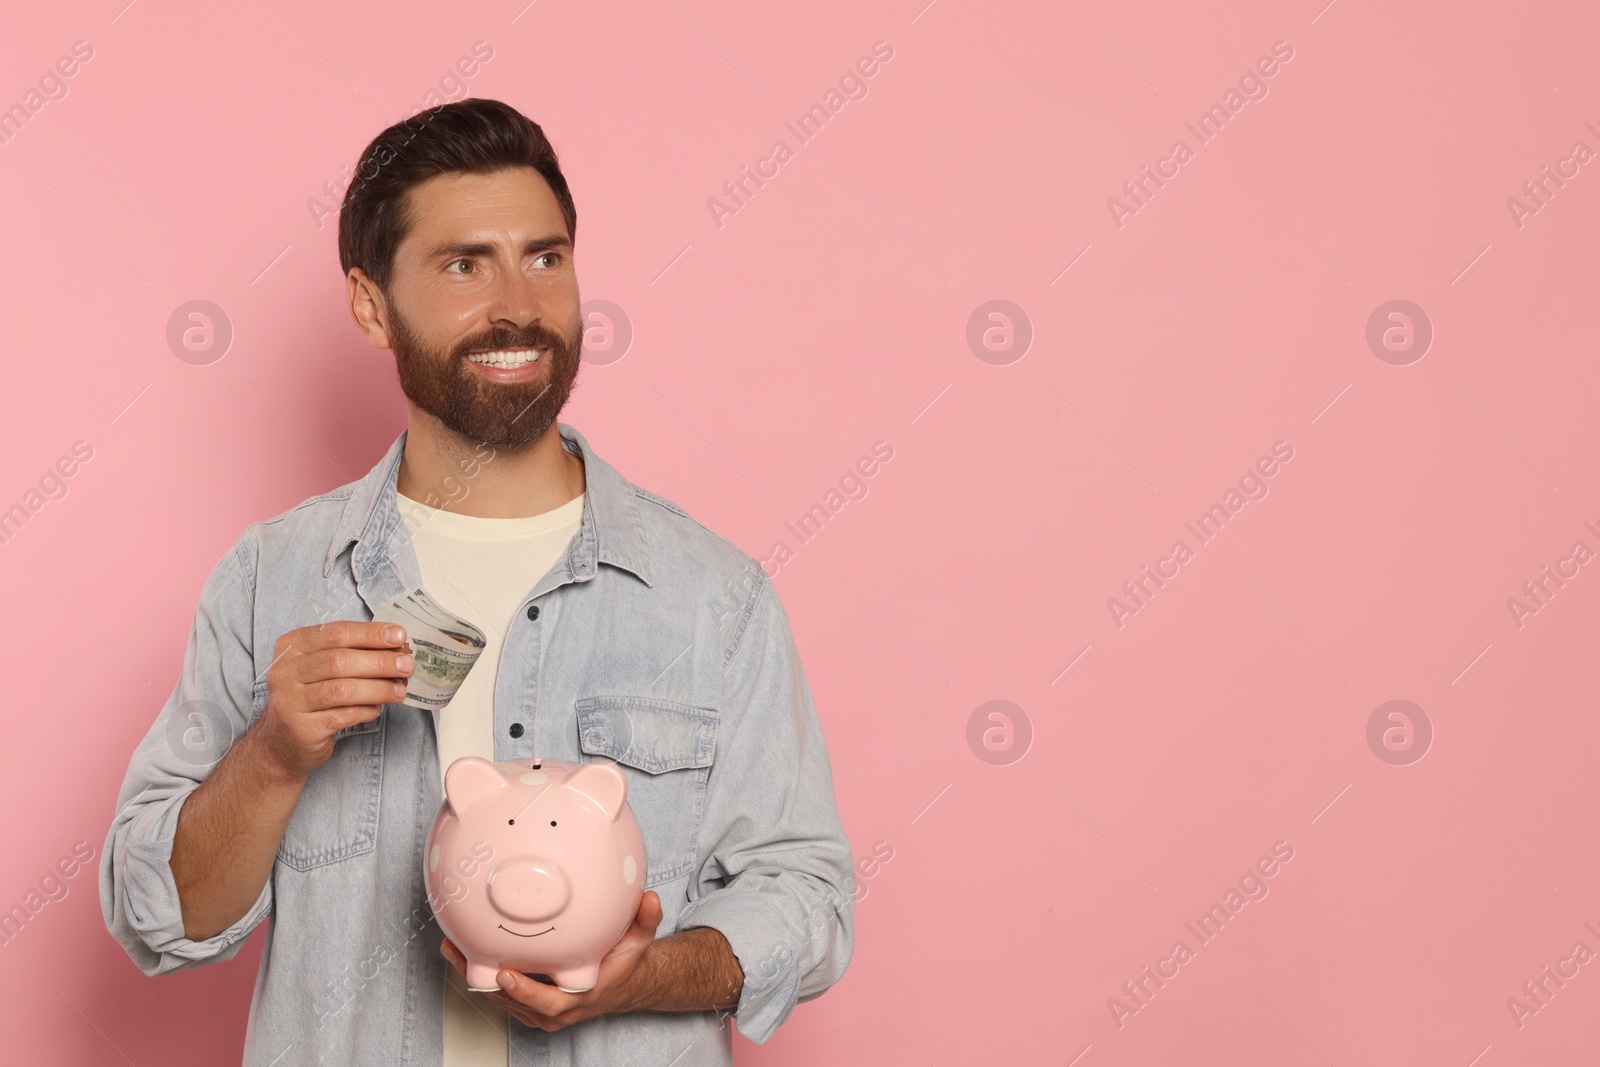 Photo of Happy man putting money into piggy bank on pale pink background, space for text